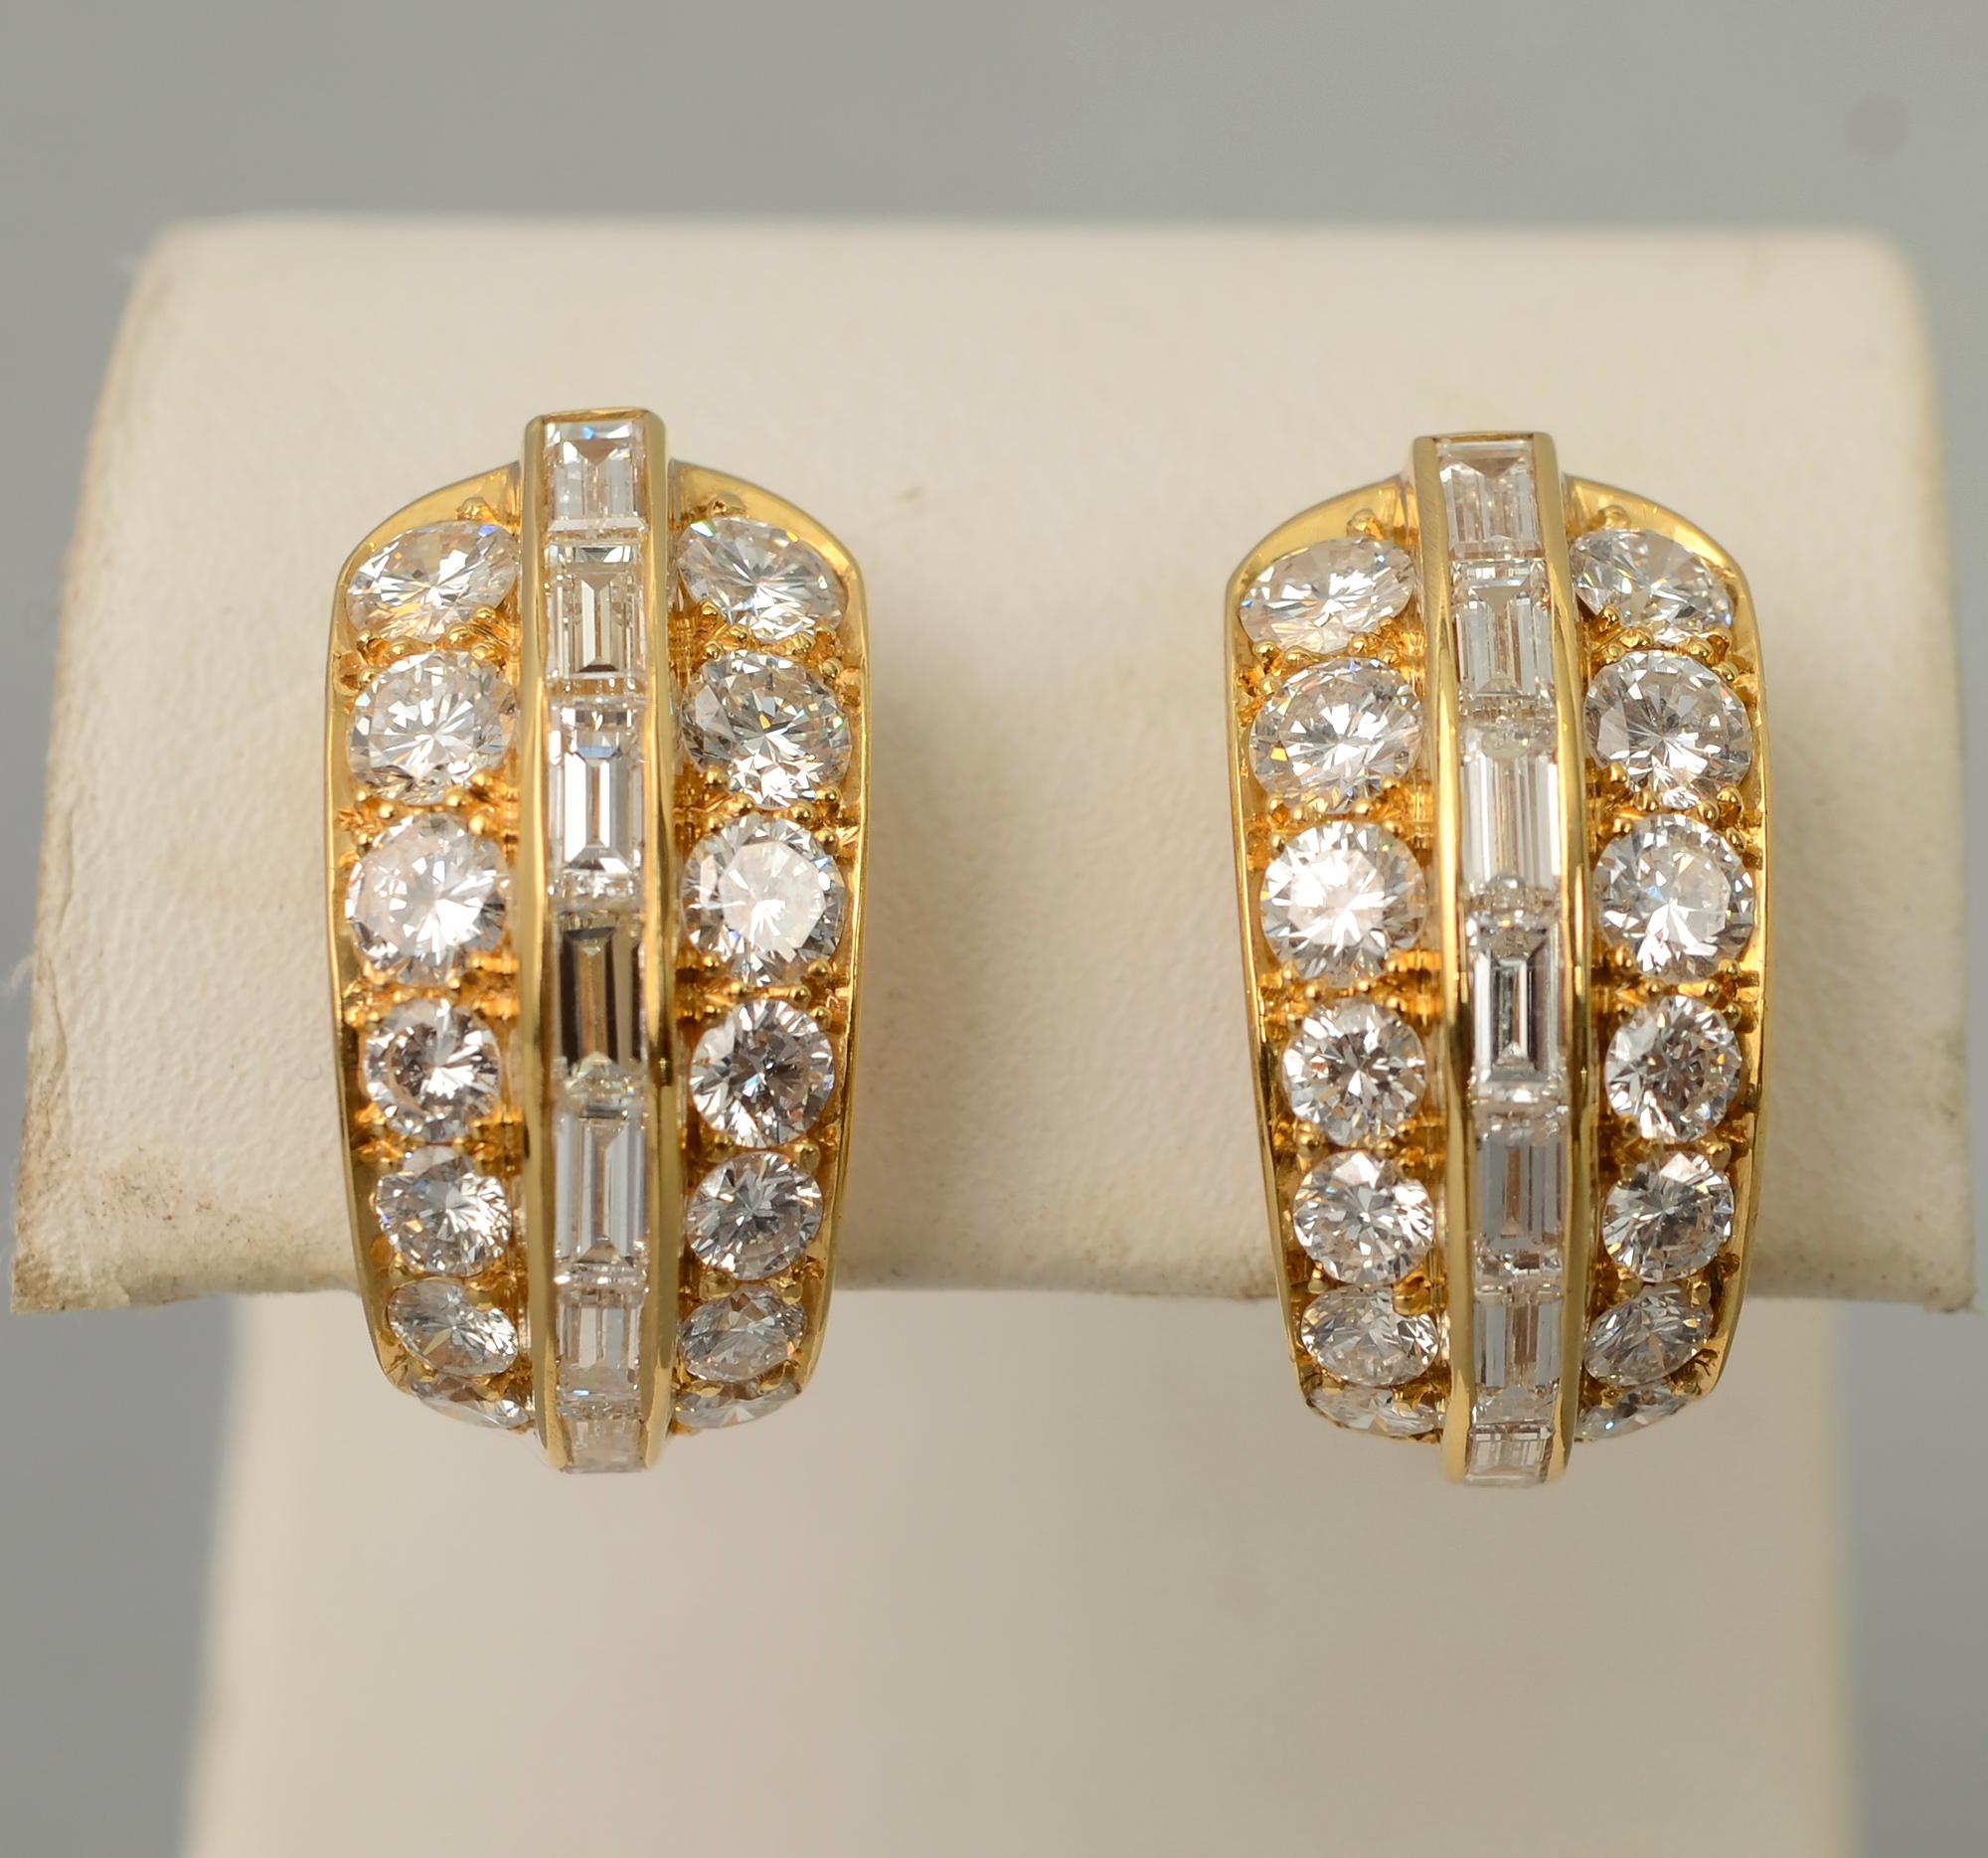 Chic and elegant diamond half hoop earrings by Bulgari. They consist of 44 diamonds; VS 1 quality with a total weight of 4.5 carats. The earrings measure 3/4 